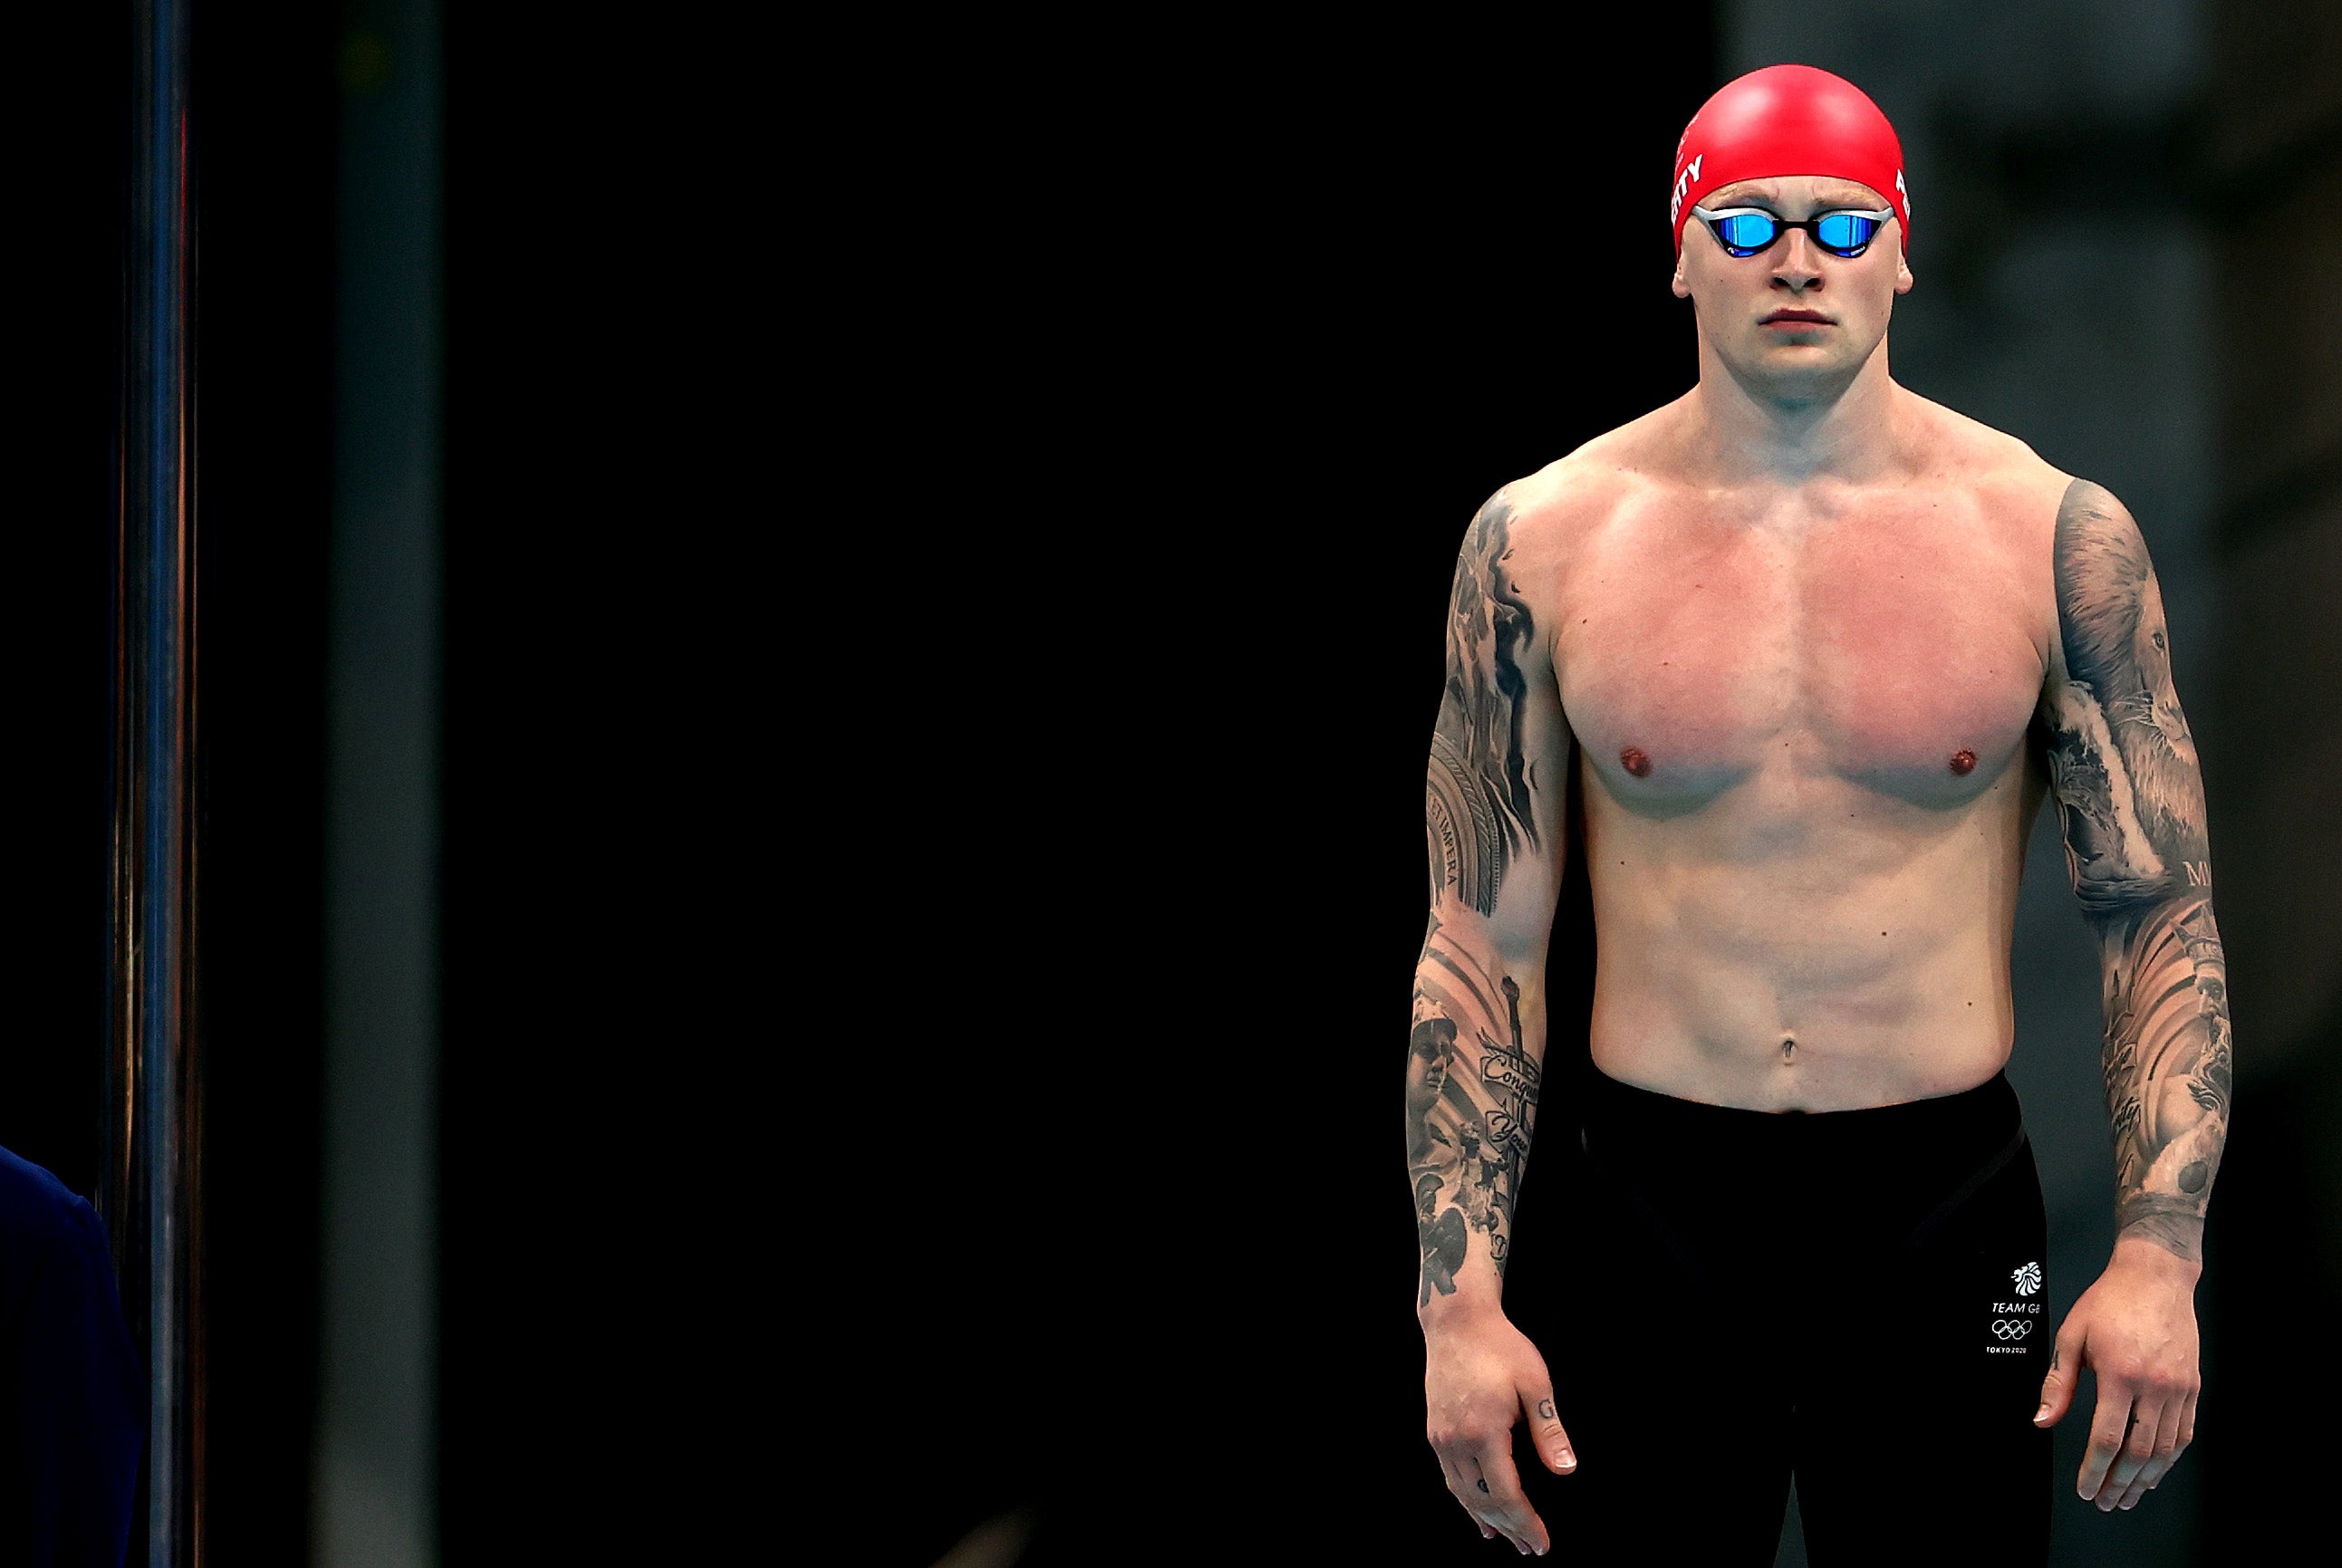 Adam Peaty successfully defended his Olympic title in Tokyo